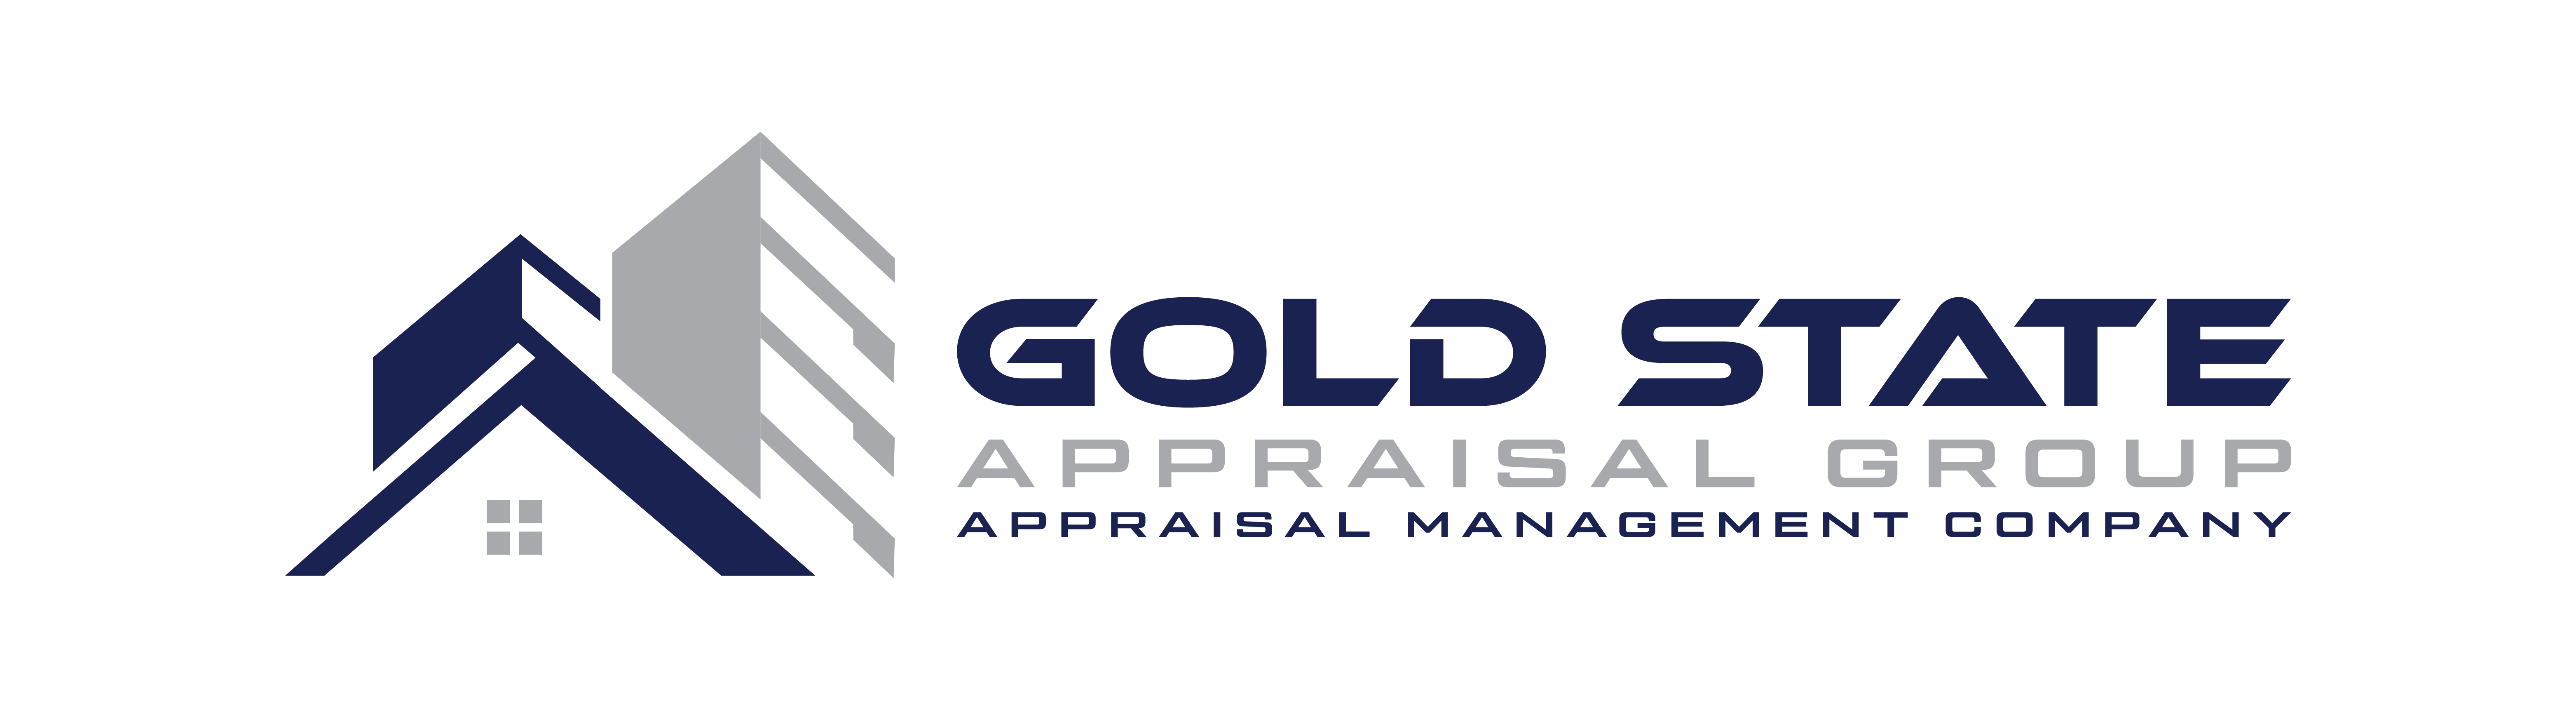 Gold State Appraisal Group